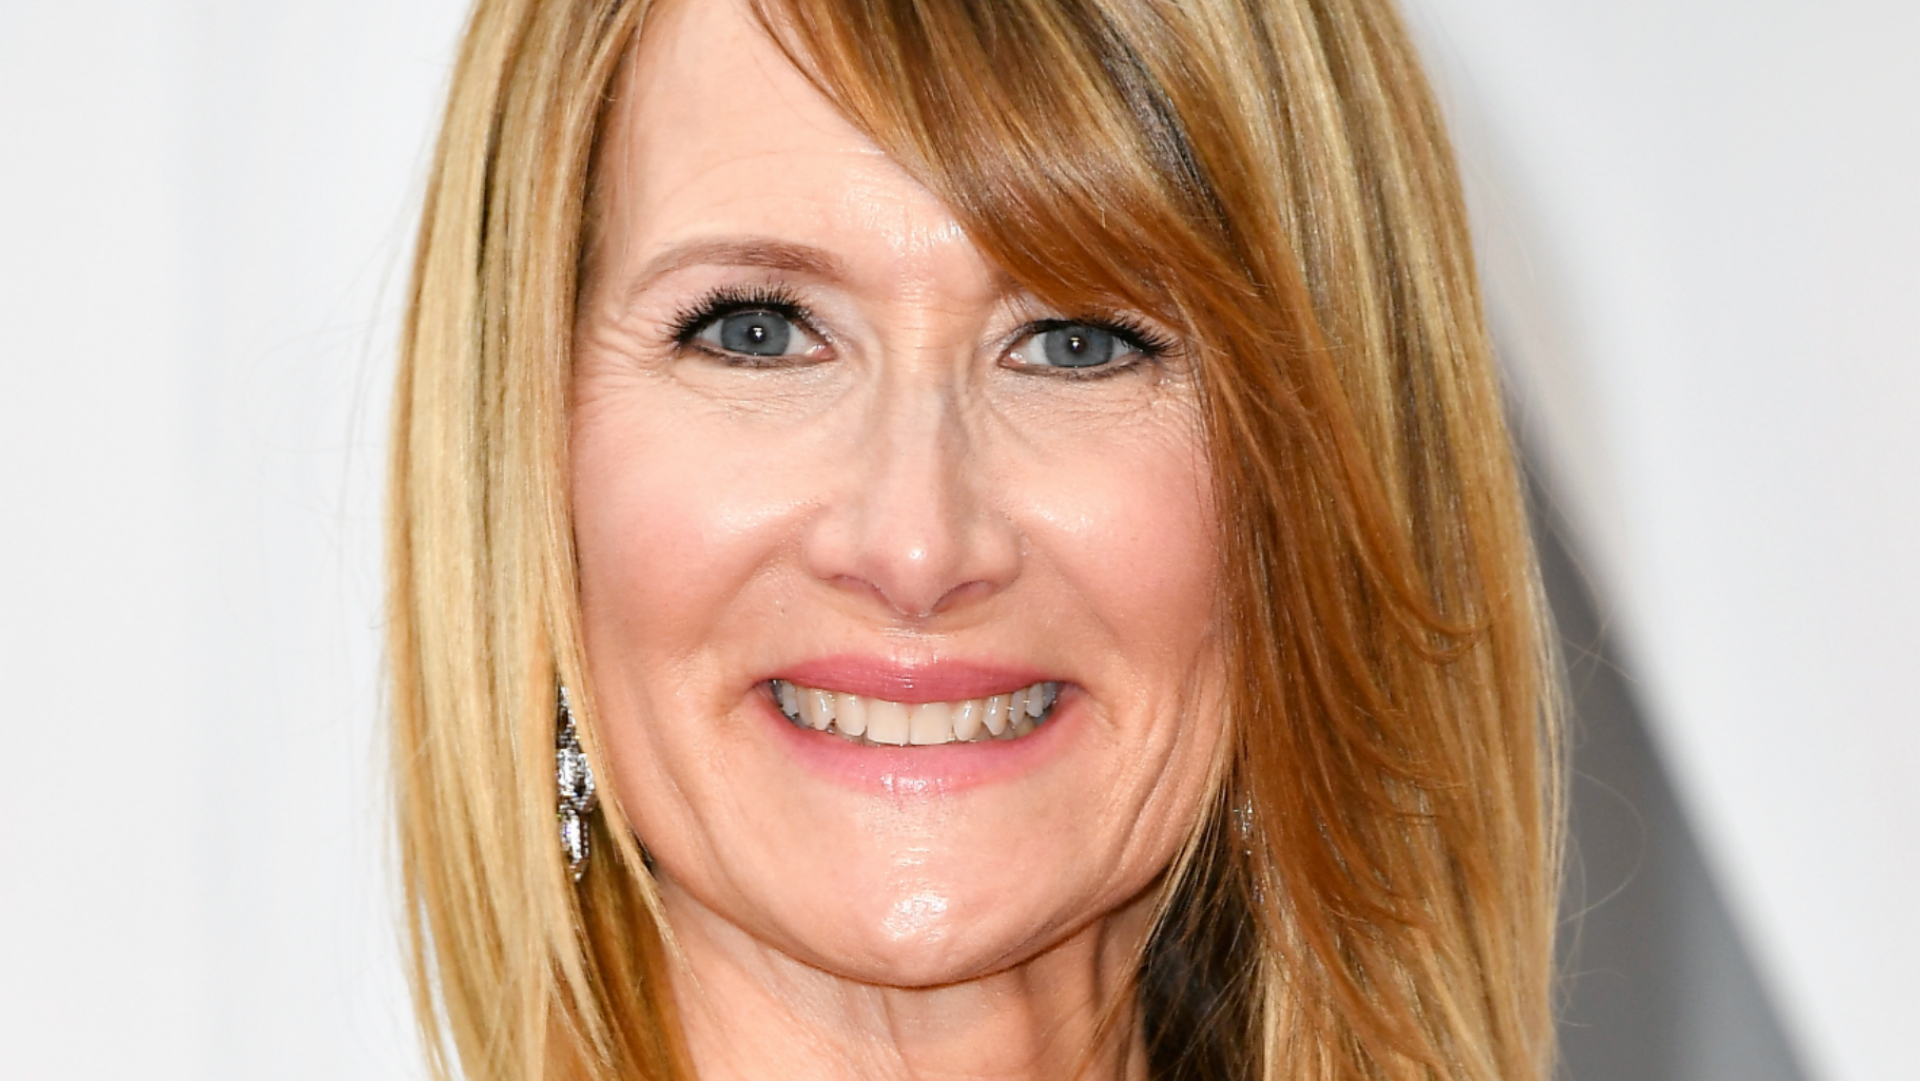 Rumored Details About Laura Dern's Star Wars Character